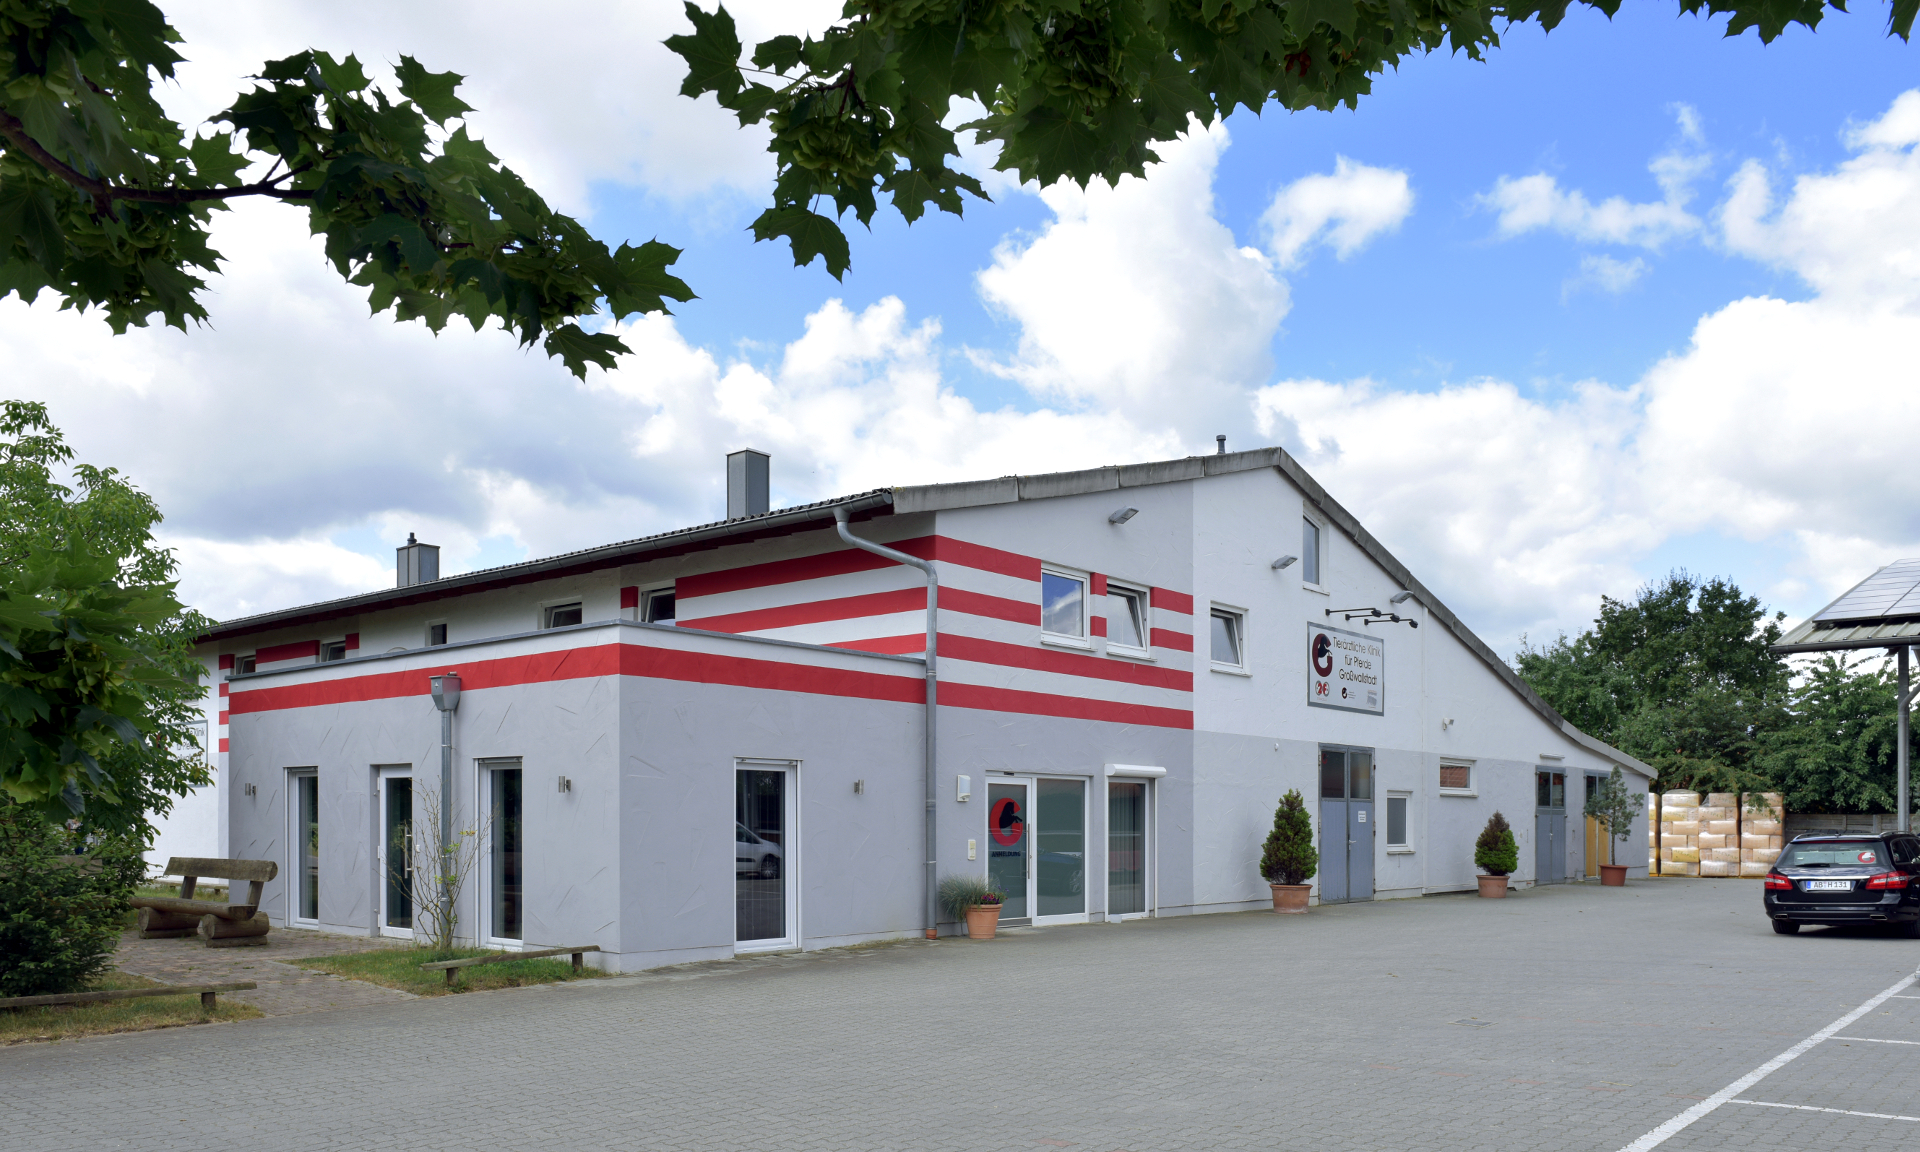 Competence centre for horses inthe area of Rhein-Main